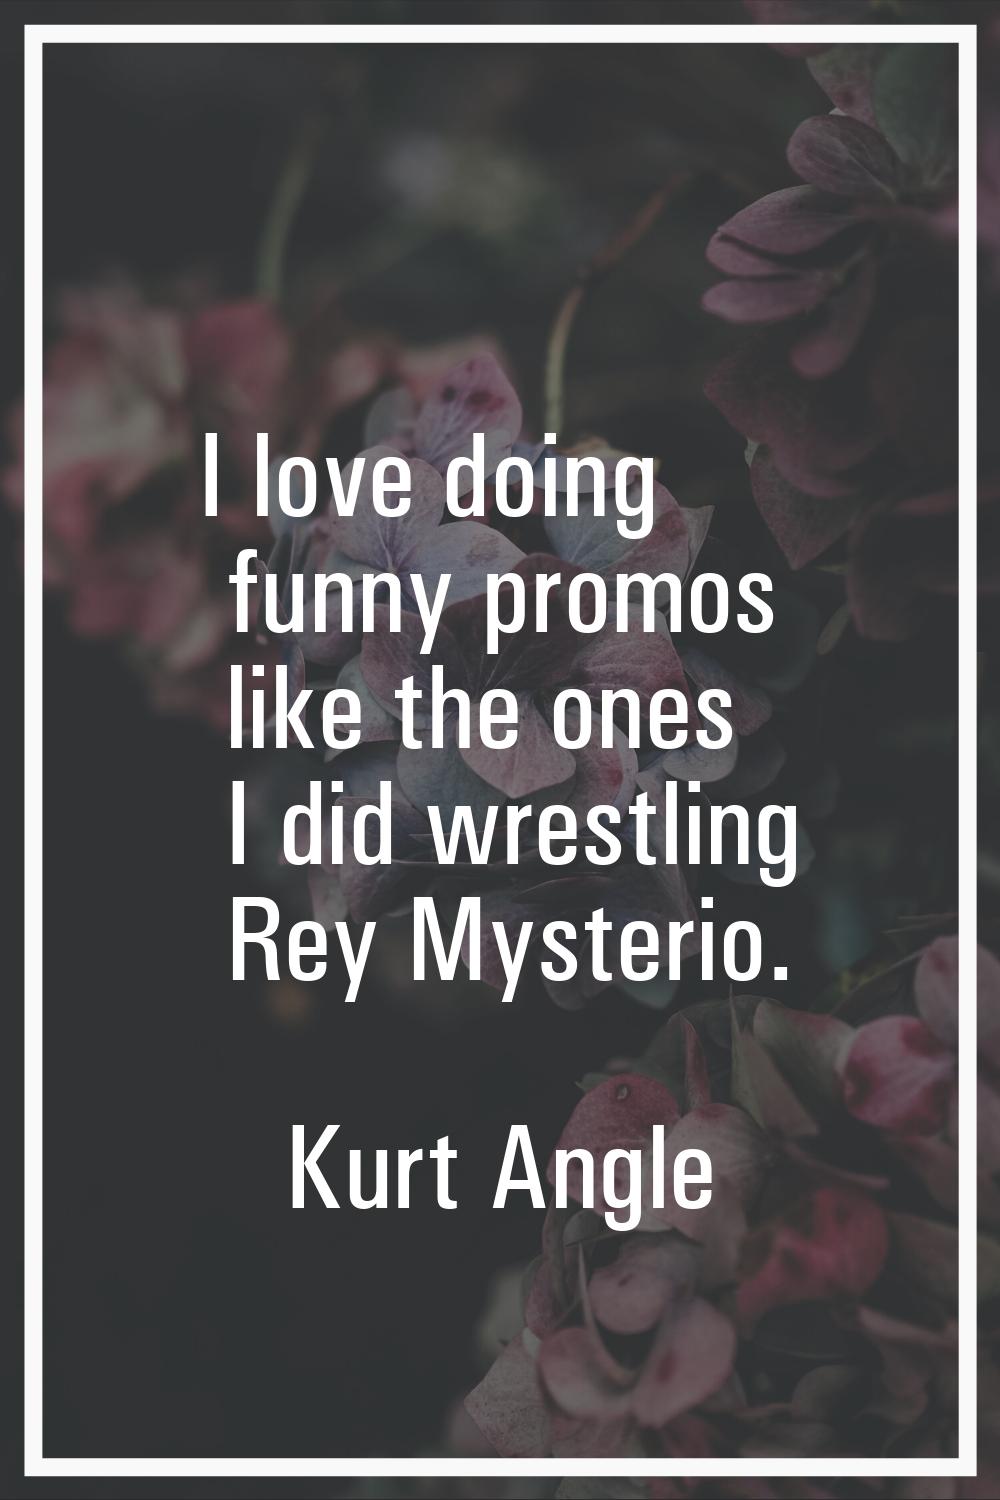 I love doing funny promos like the ones I did wrestling Rey Mysterio.